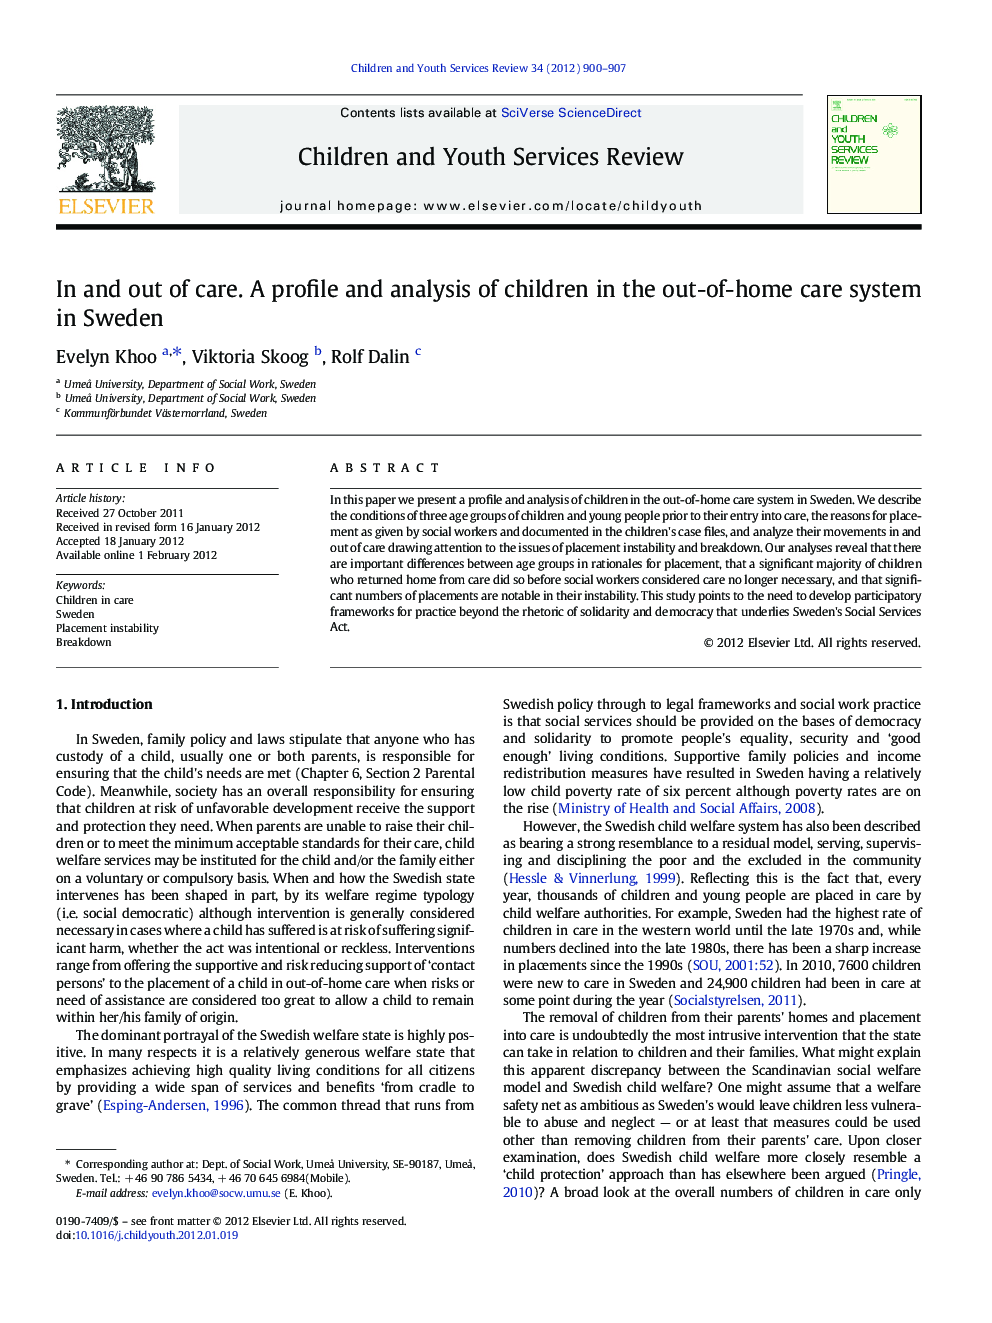 In and out of care. A profile and analysis of children in the out-of-home care system in Sweden